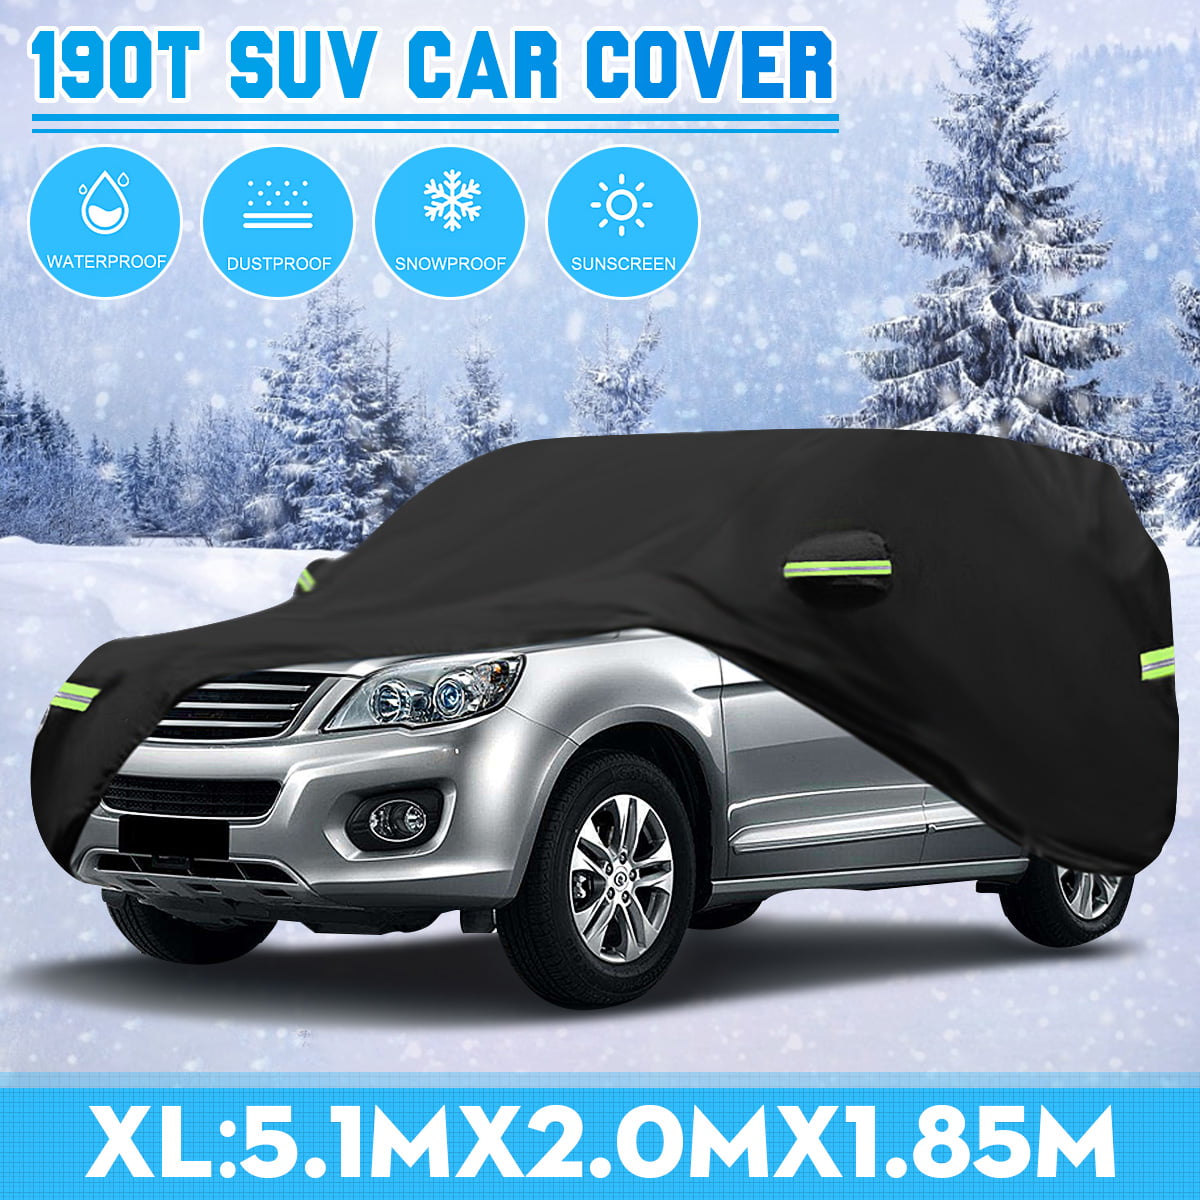 Car Windshield Cover 1 Piece Professional Dust-Proof Car Windshield Cover Prevent Heat Sun Shade Windscreen Anti Frost Freezing Fading Protector 192 x 70 